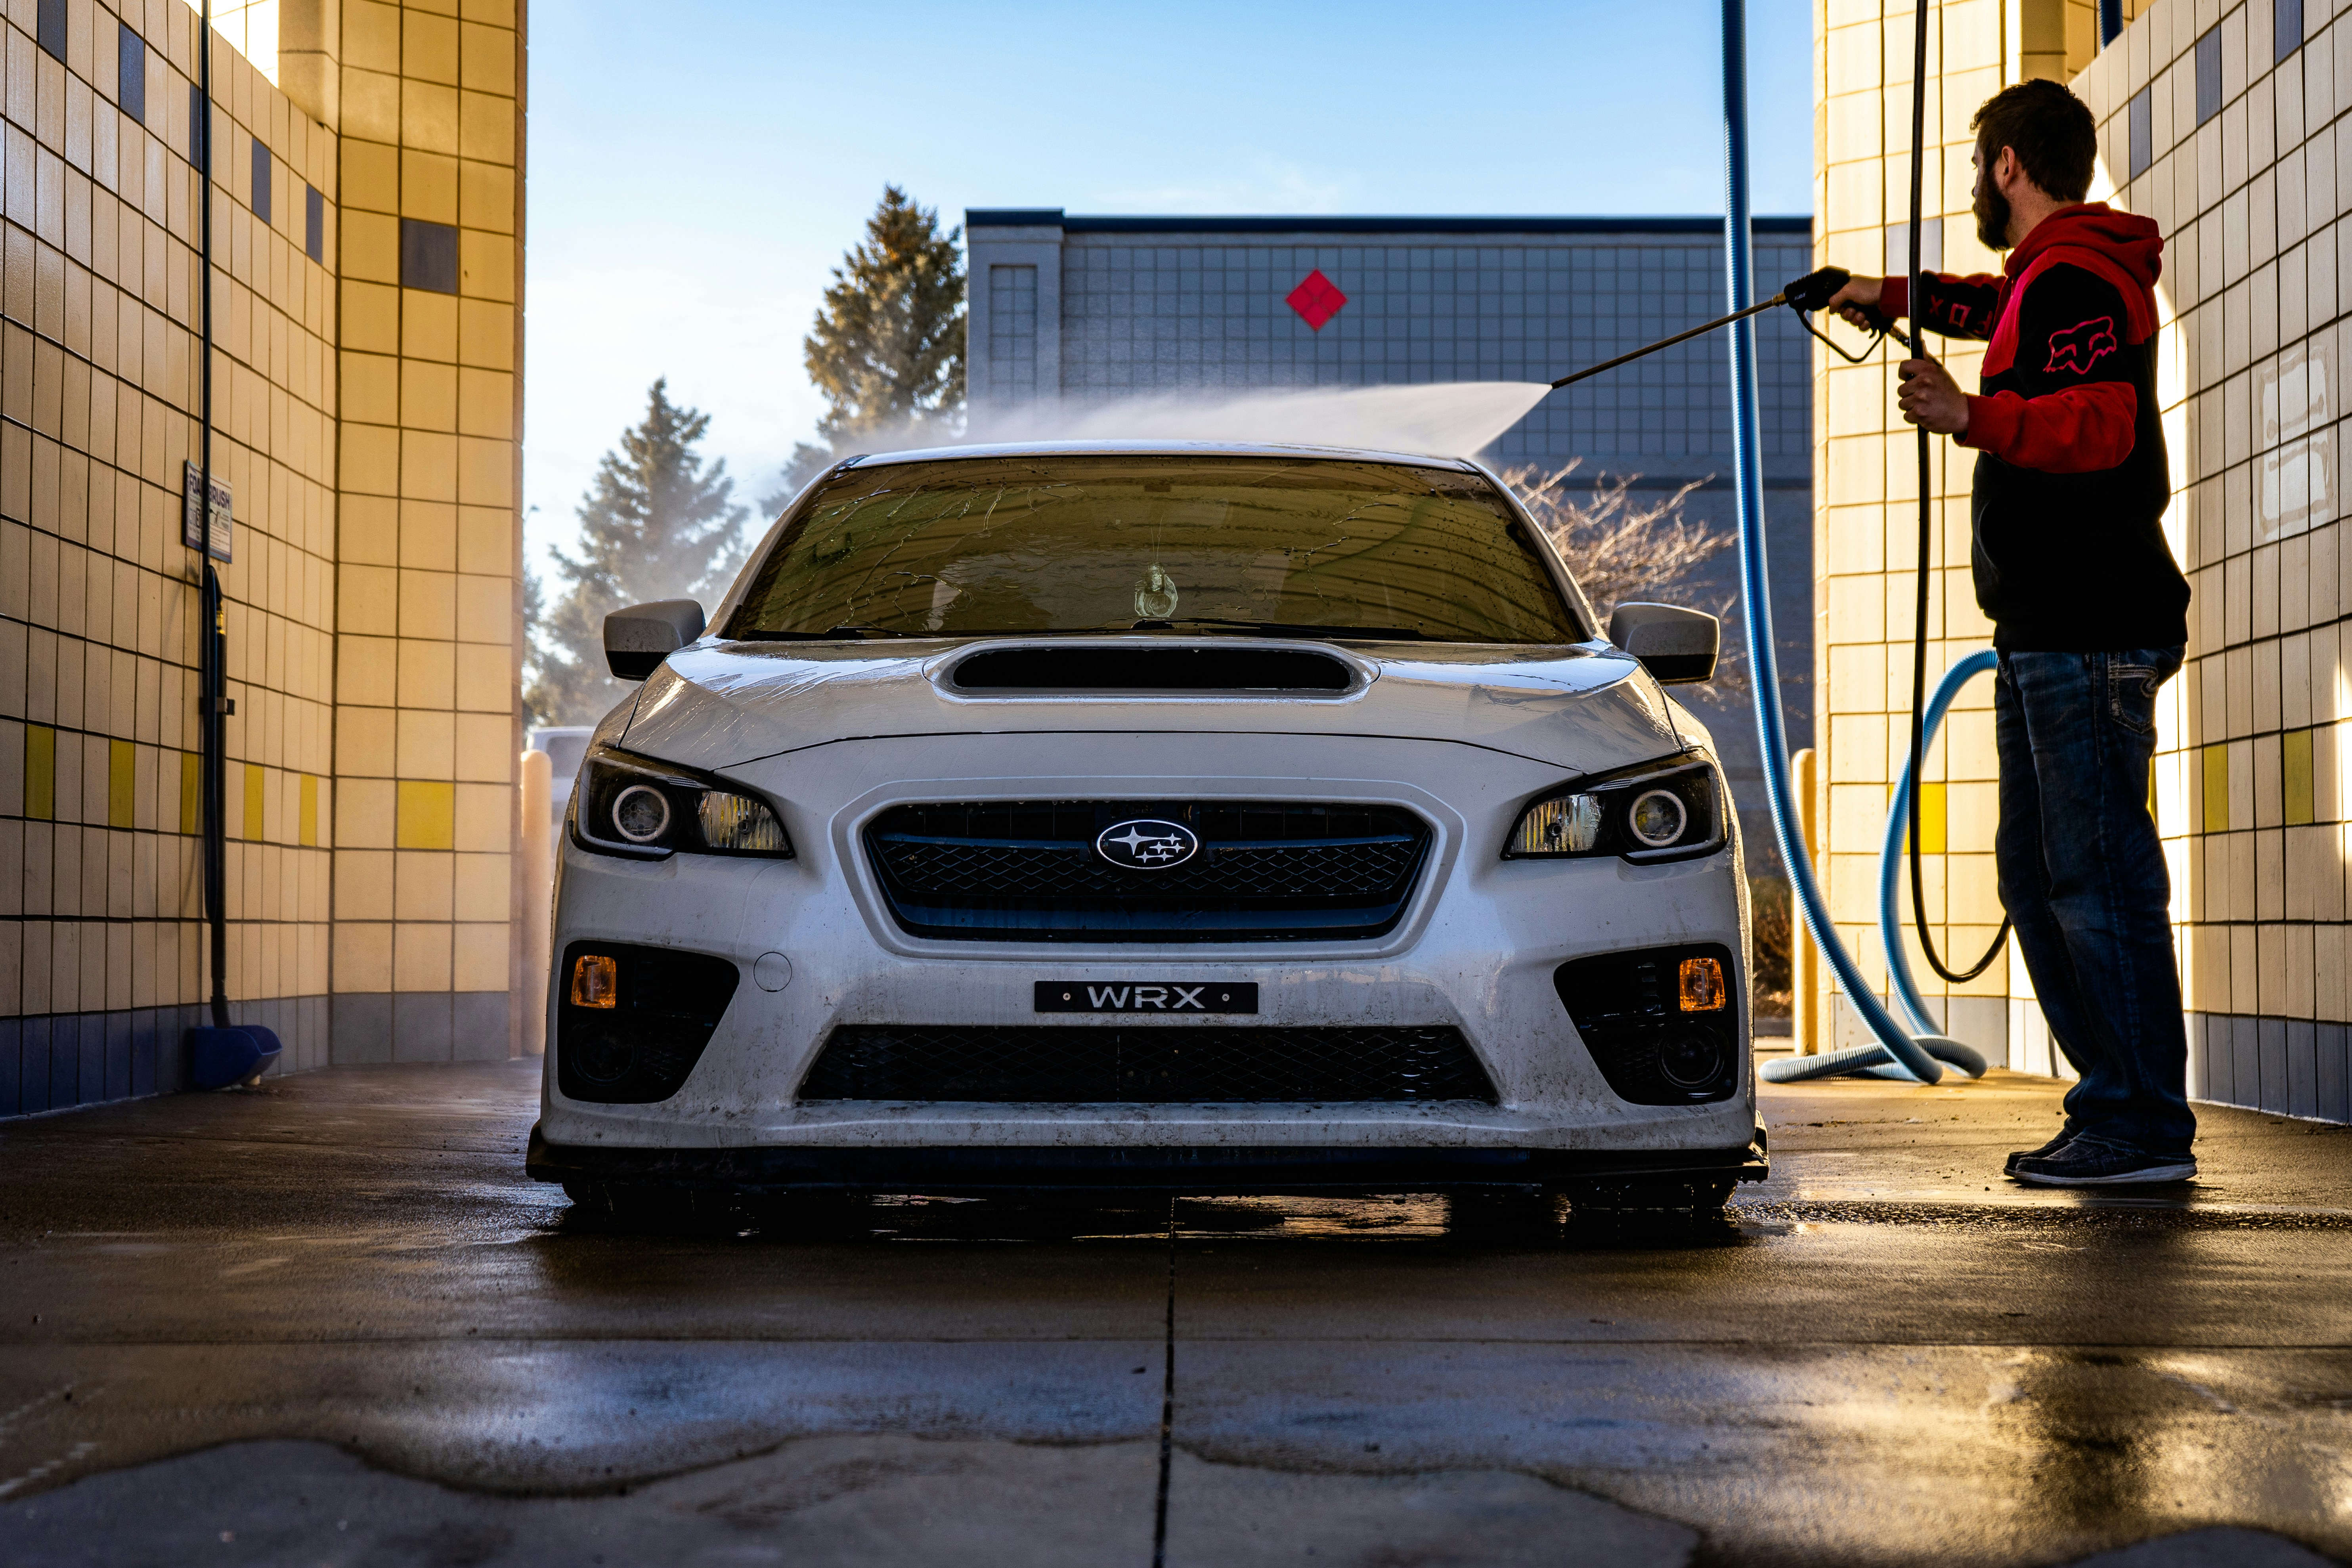 How To Pressure Wash Your Car Safely